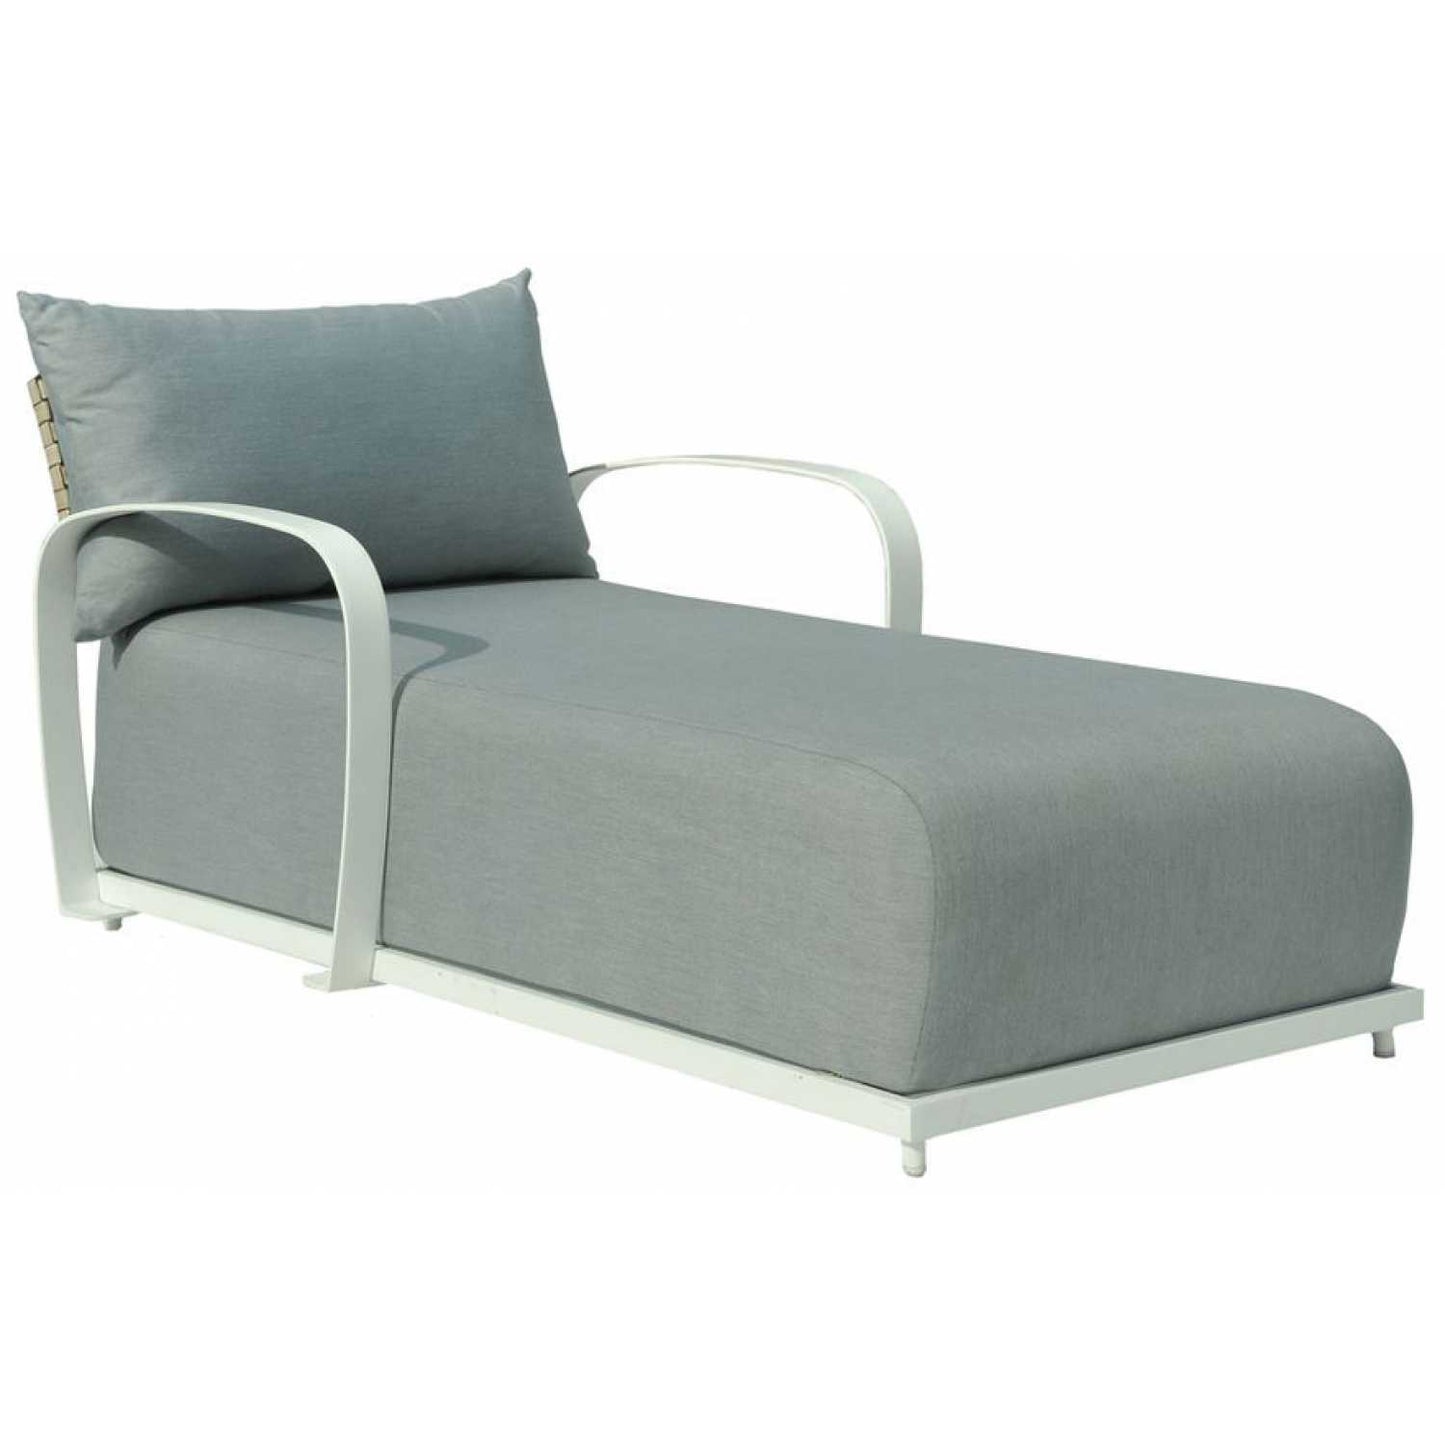 Windsor White Chaise - PadioLiving - Windsor White Chaise - Outdoor Chaise - Sea Shell 30mm Weave- Panama Artic (£1567) - PadioLiving